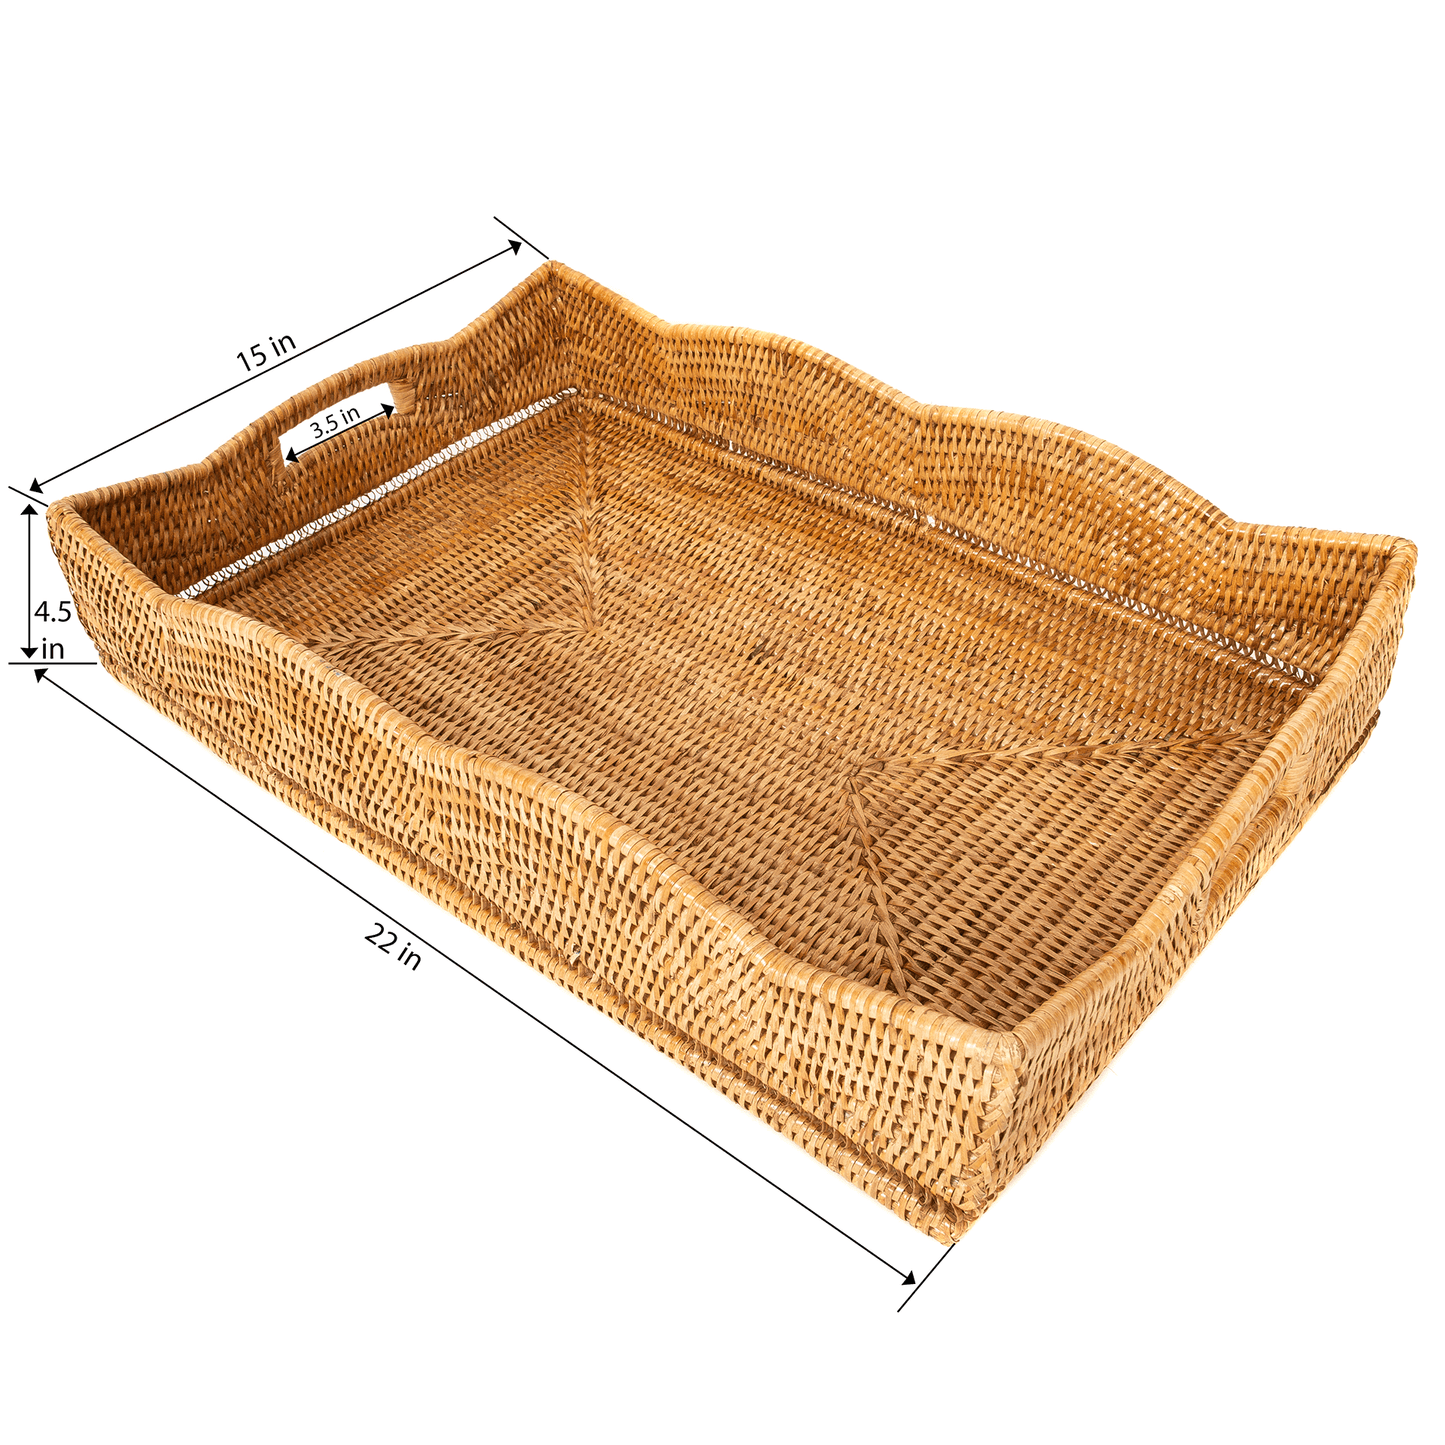 Artifacts Rattan Scallop Collection Rectangular Tray: White Wash